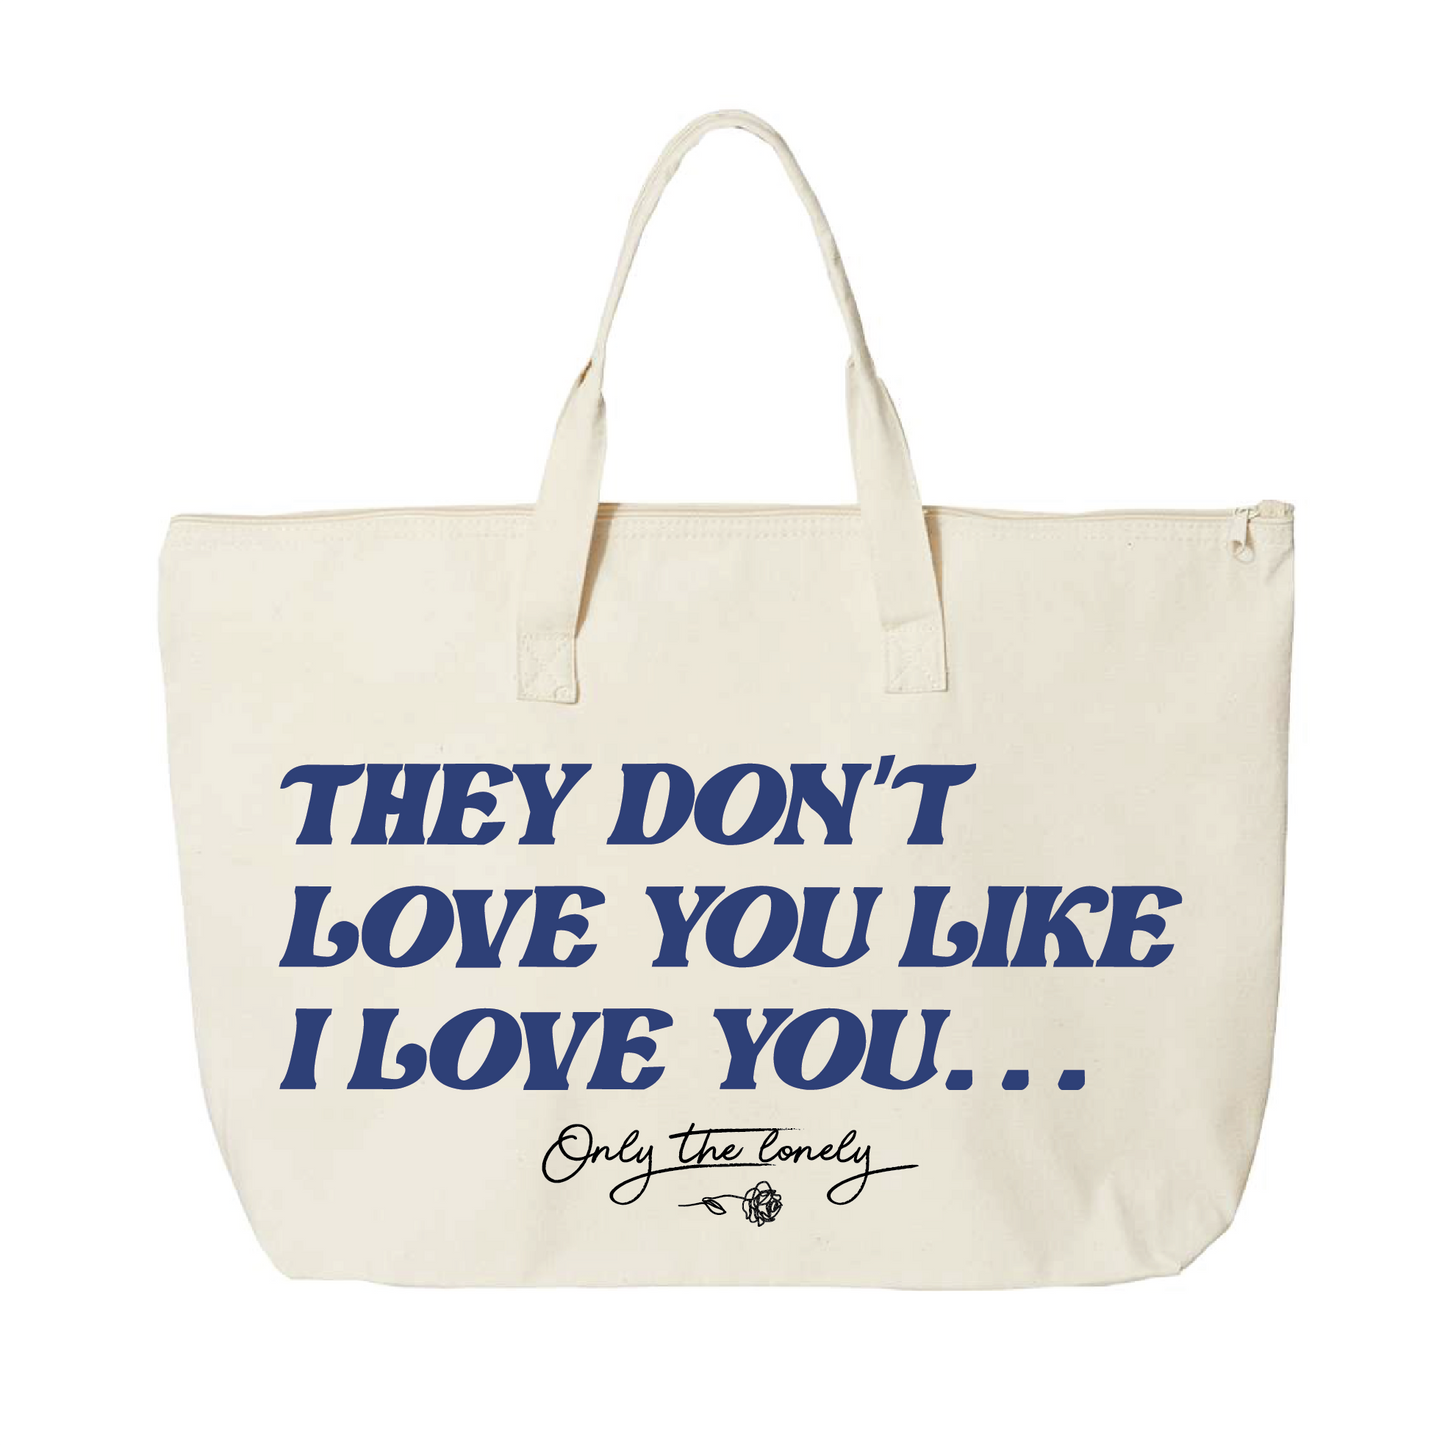 ONLY THE LONELY "THEY DON'T LOVE YOU LIKE I LOVE YOU" TOTE BAG